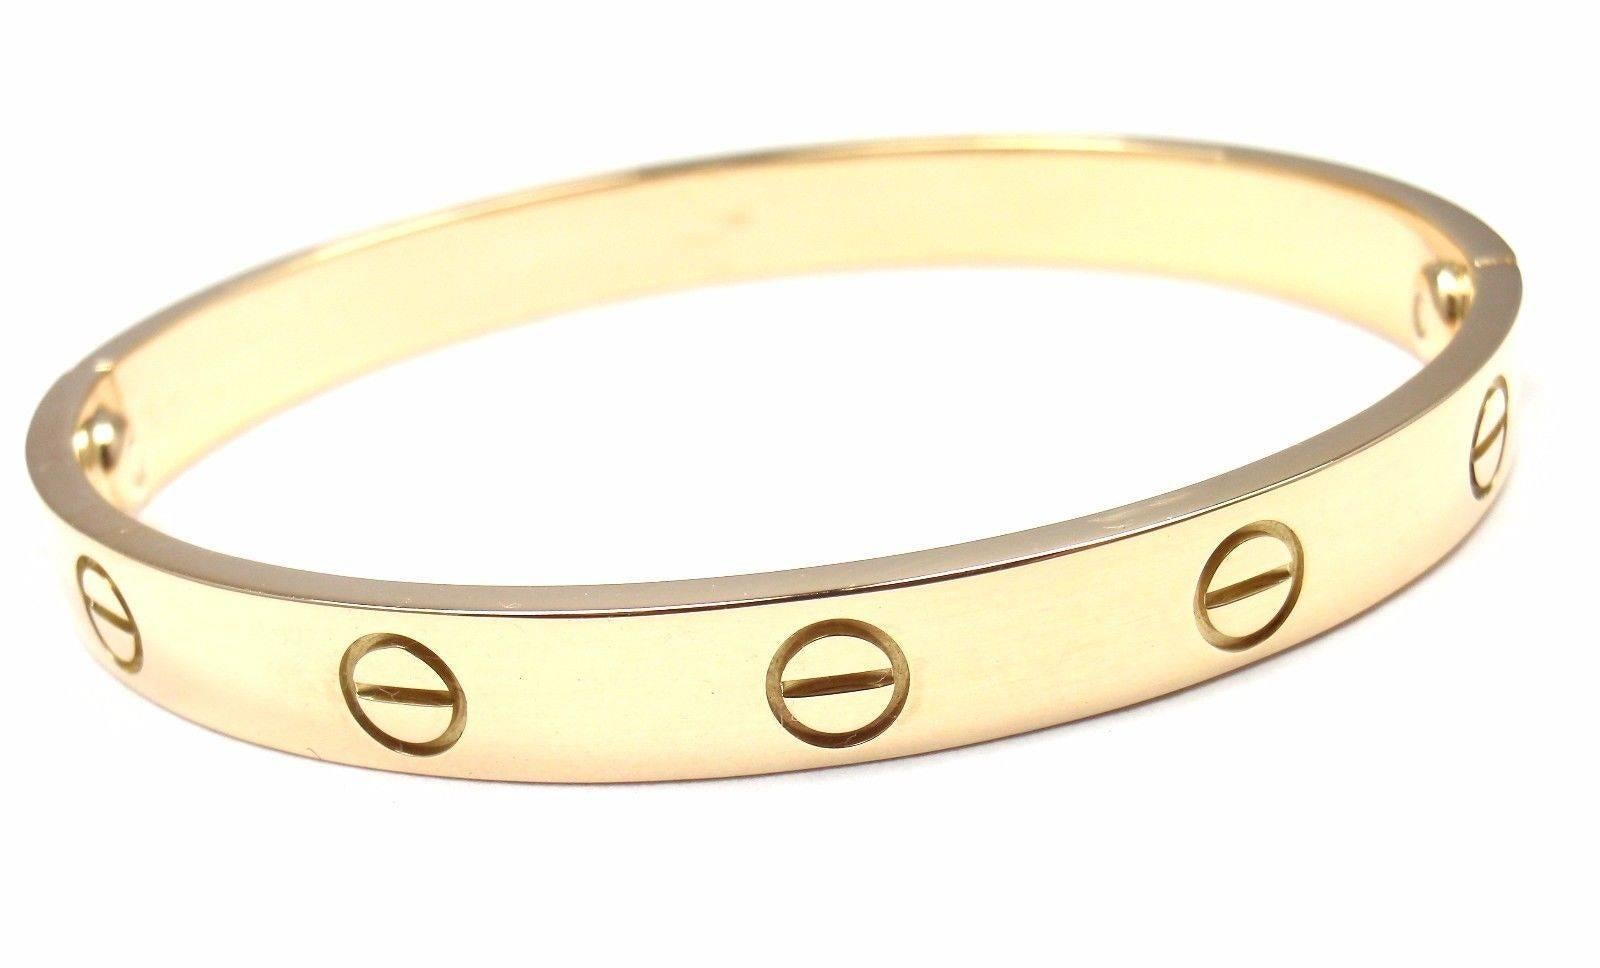 18k Yellow Gold Love Bangle Bracelet by Cartier Size 16.
This bracelet comes with a Cartier box, Cartier certificate and Cartier screwdriver.

Details: 
Size: 16
Weight: 29.4 grams
Width: 6.5mm 
Hallmarks: Cartier 750 16 M08287

*Free Shipping